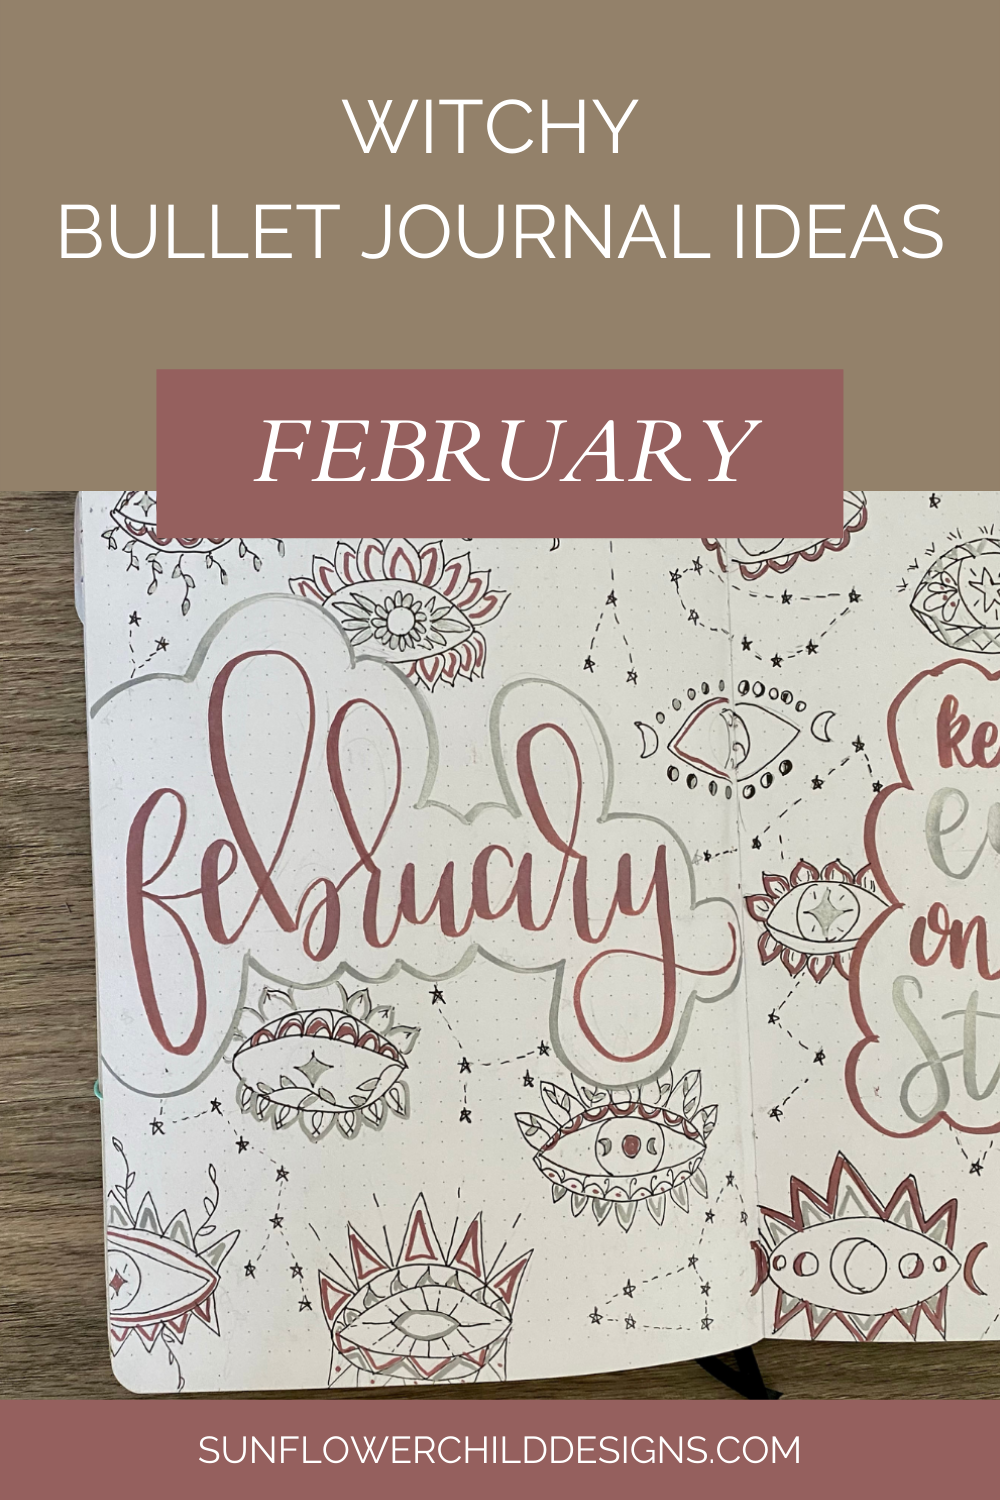 witchy-bullet-journal-ideas-february-bullet-journal-ideas 2.png